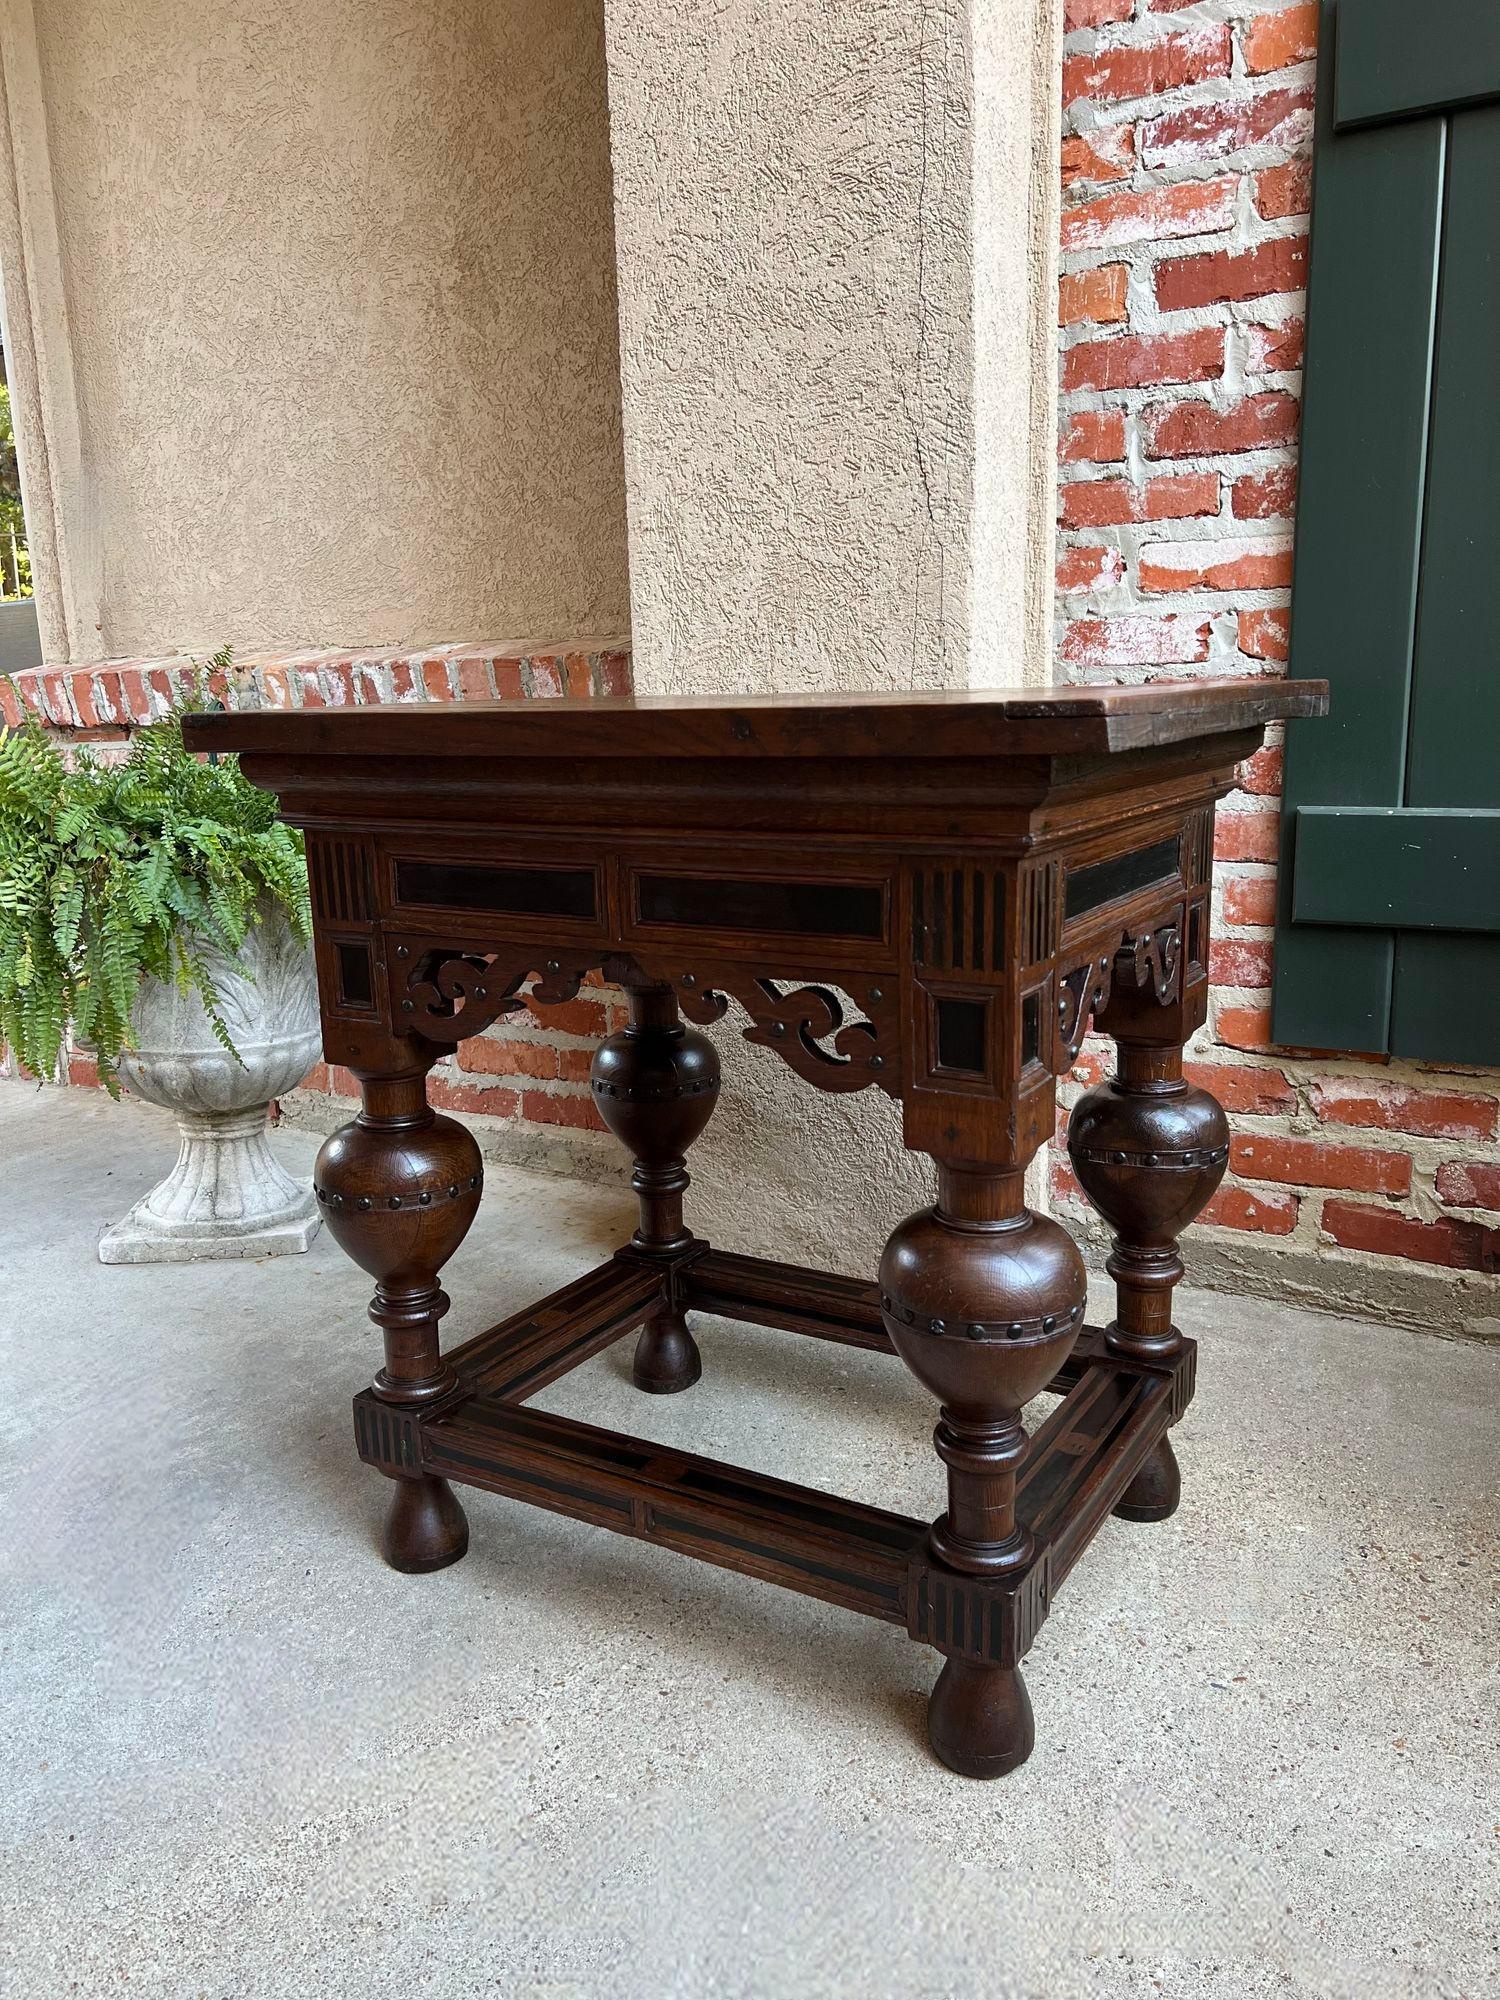 Antique Dutch Sofa Side Table Carved Oak Bulbous Leg Baroque Ebonzied Danish.

Direct from Europe, a distinctive antique European table with a stunning silhouette, versatile size, and distinctive style, certain to command attention, and compliment